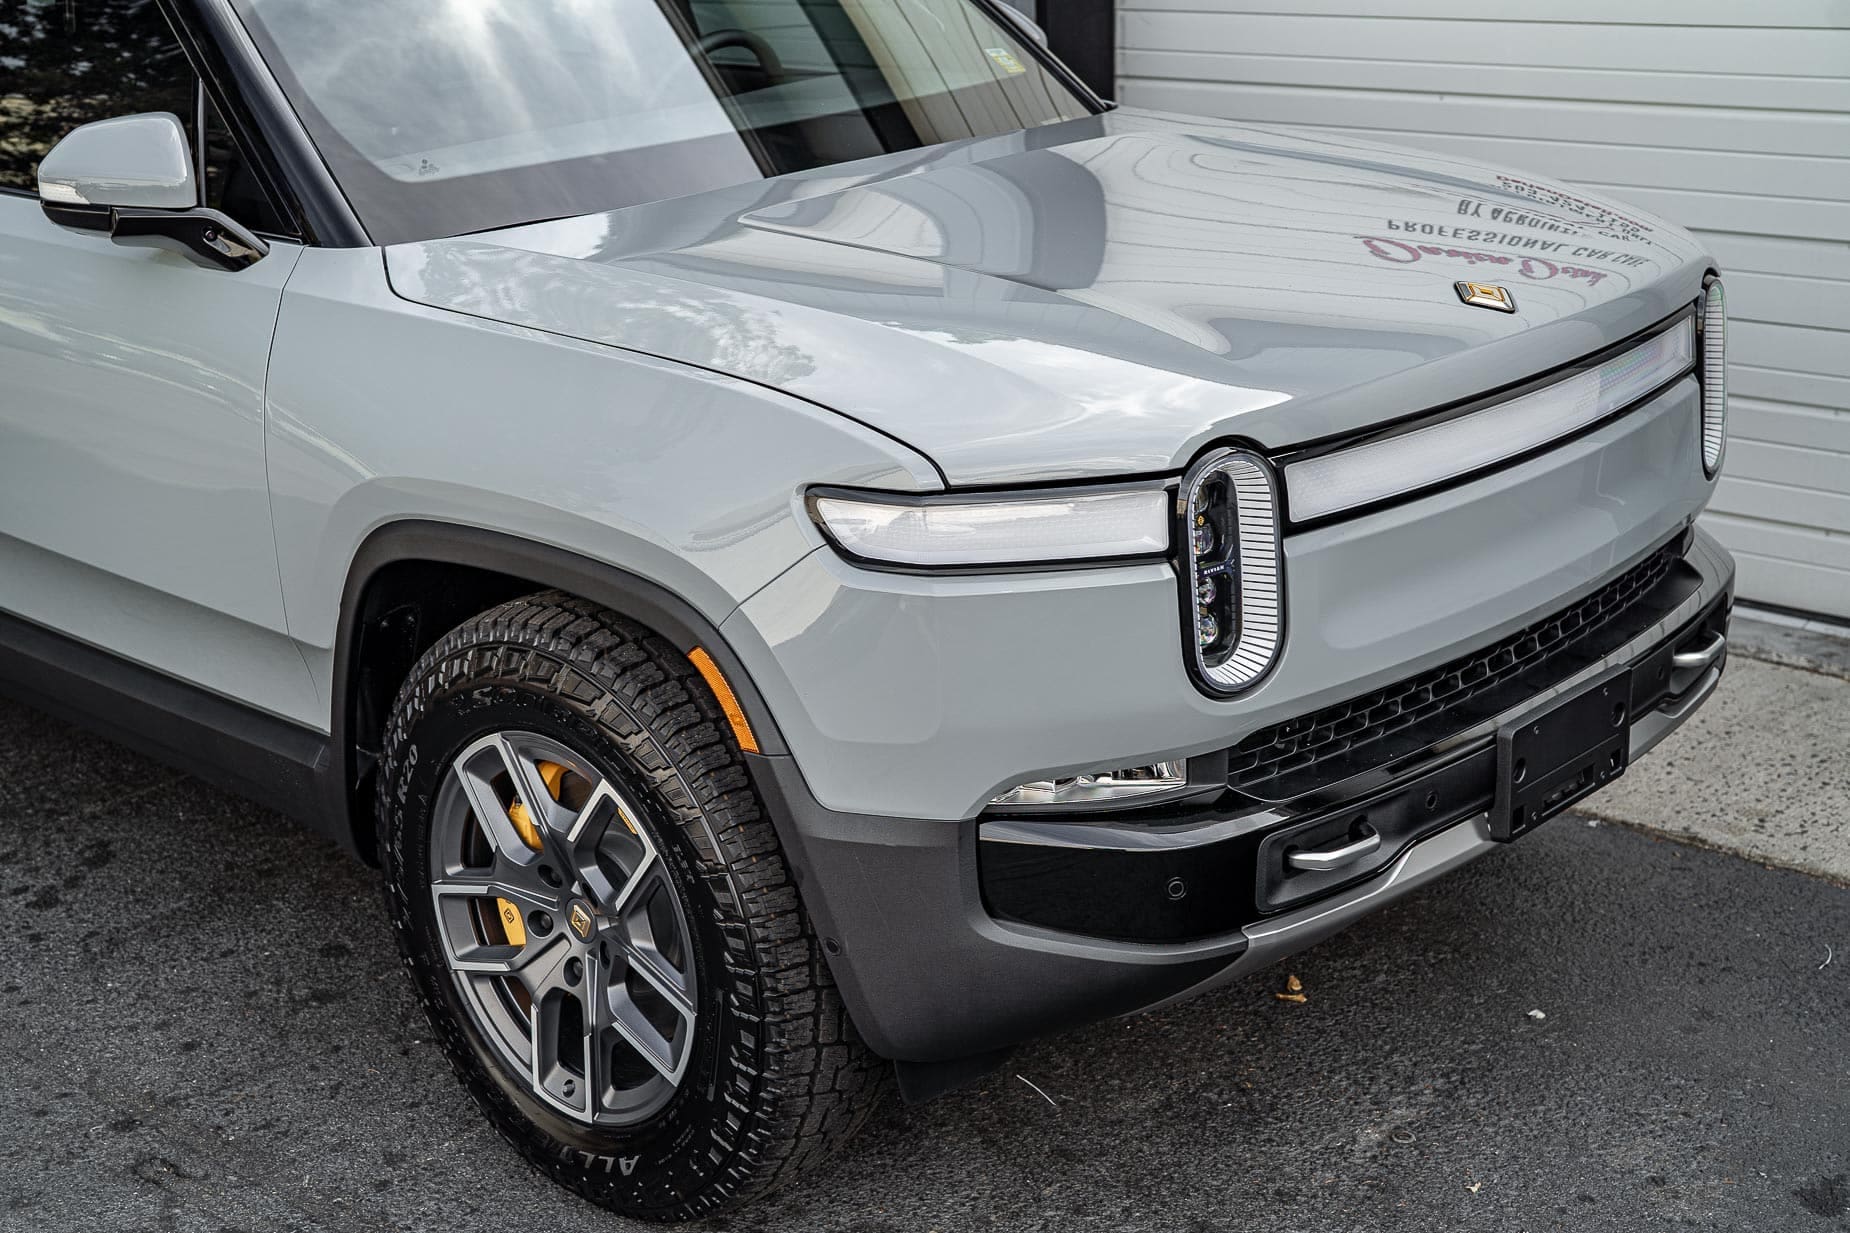 2022 Rivian R1T Adventure Limestone Gray All Terrain Tires Xpel Paint Protection Film Ppf Ceramic Coating 15